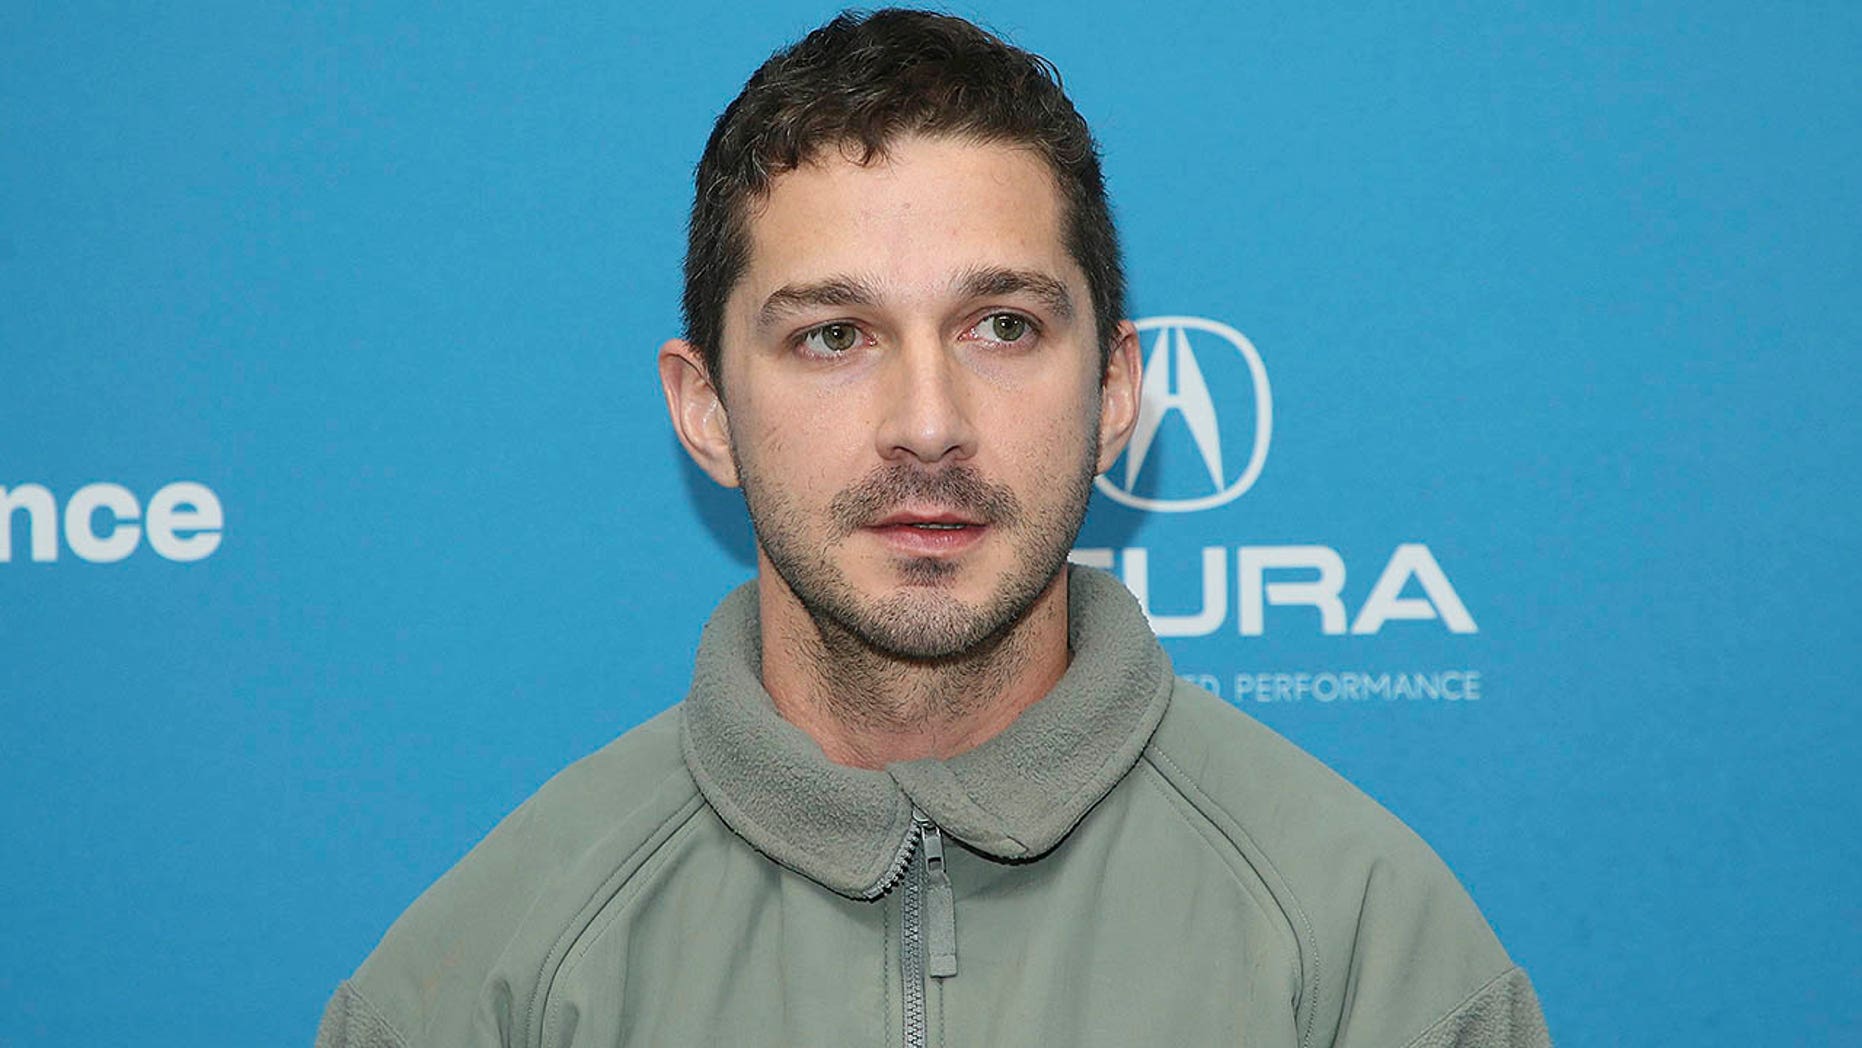 Shia LaBeouf wrote autobiographical film 'Honey Boy' while in court-ordered rehab ...